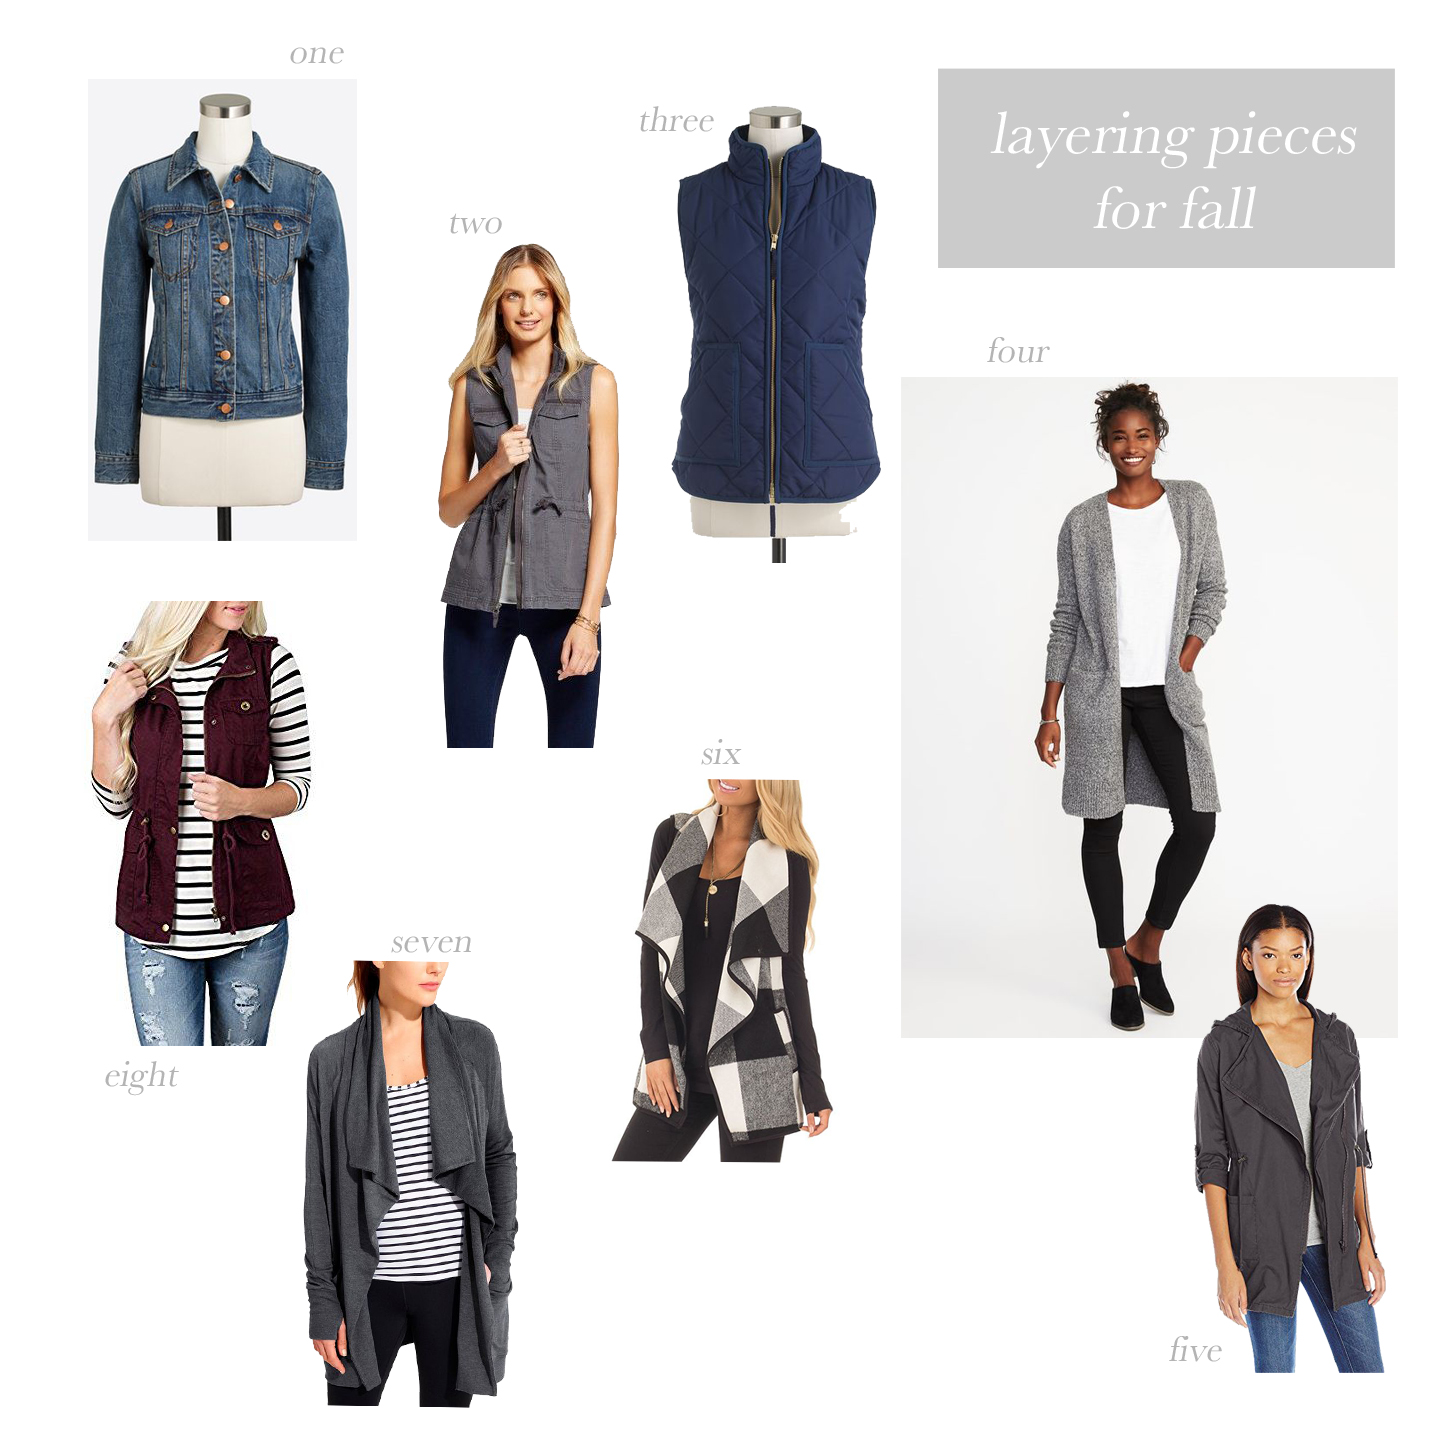 Layering pieces for Fall